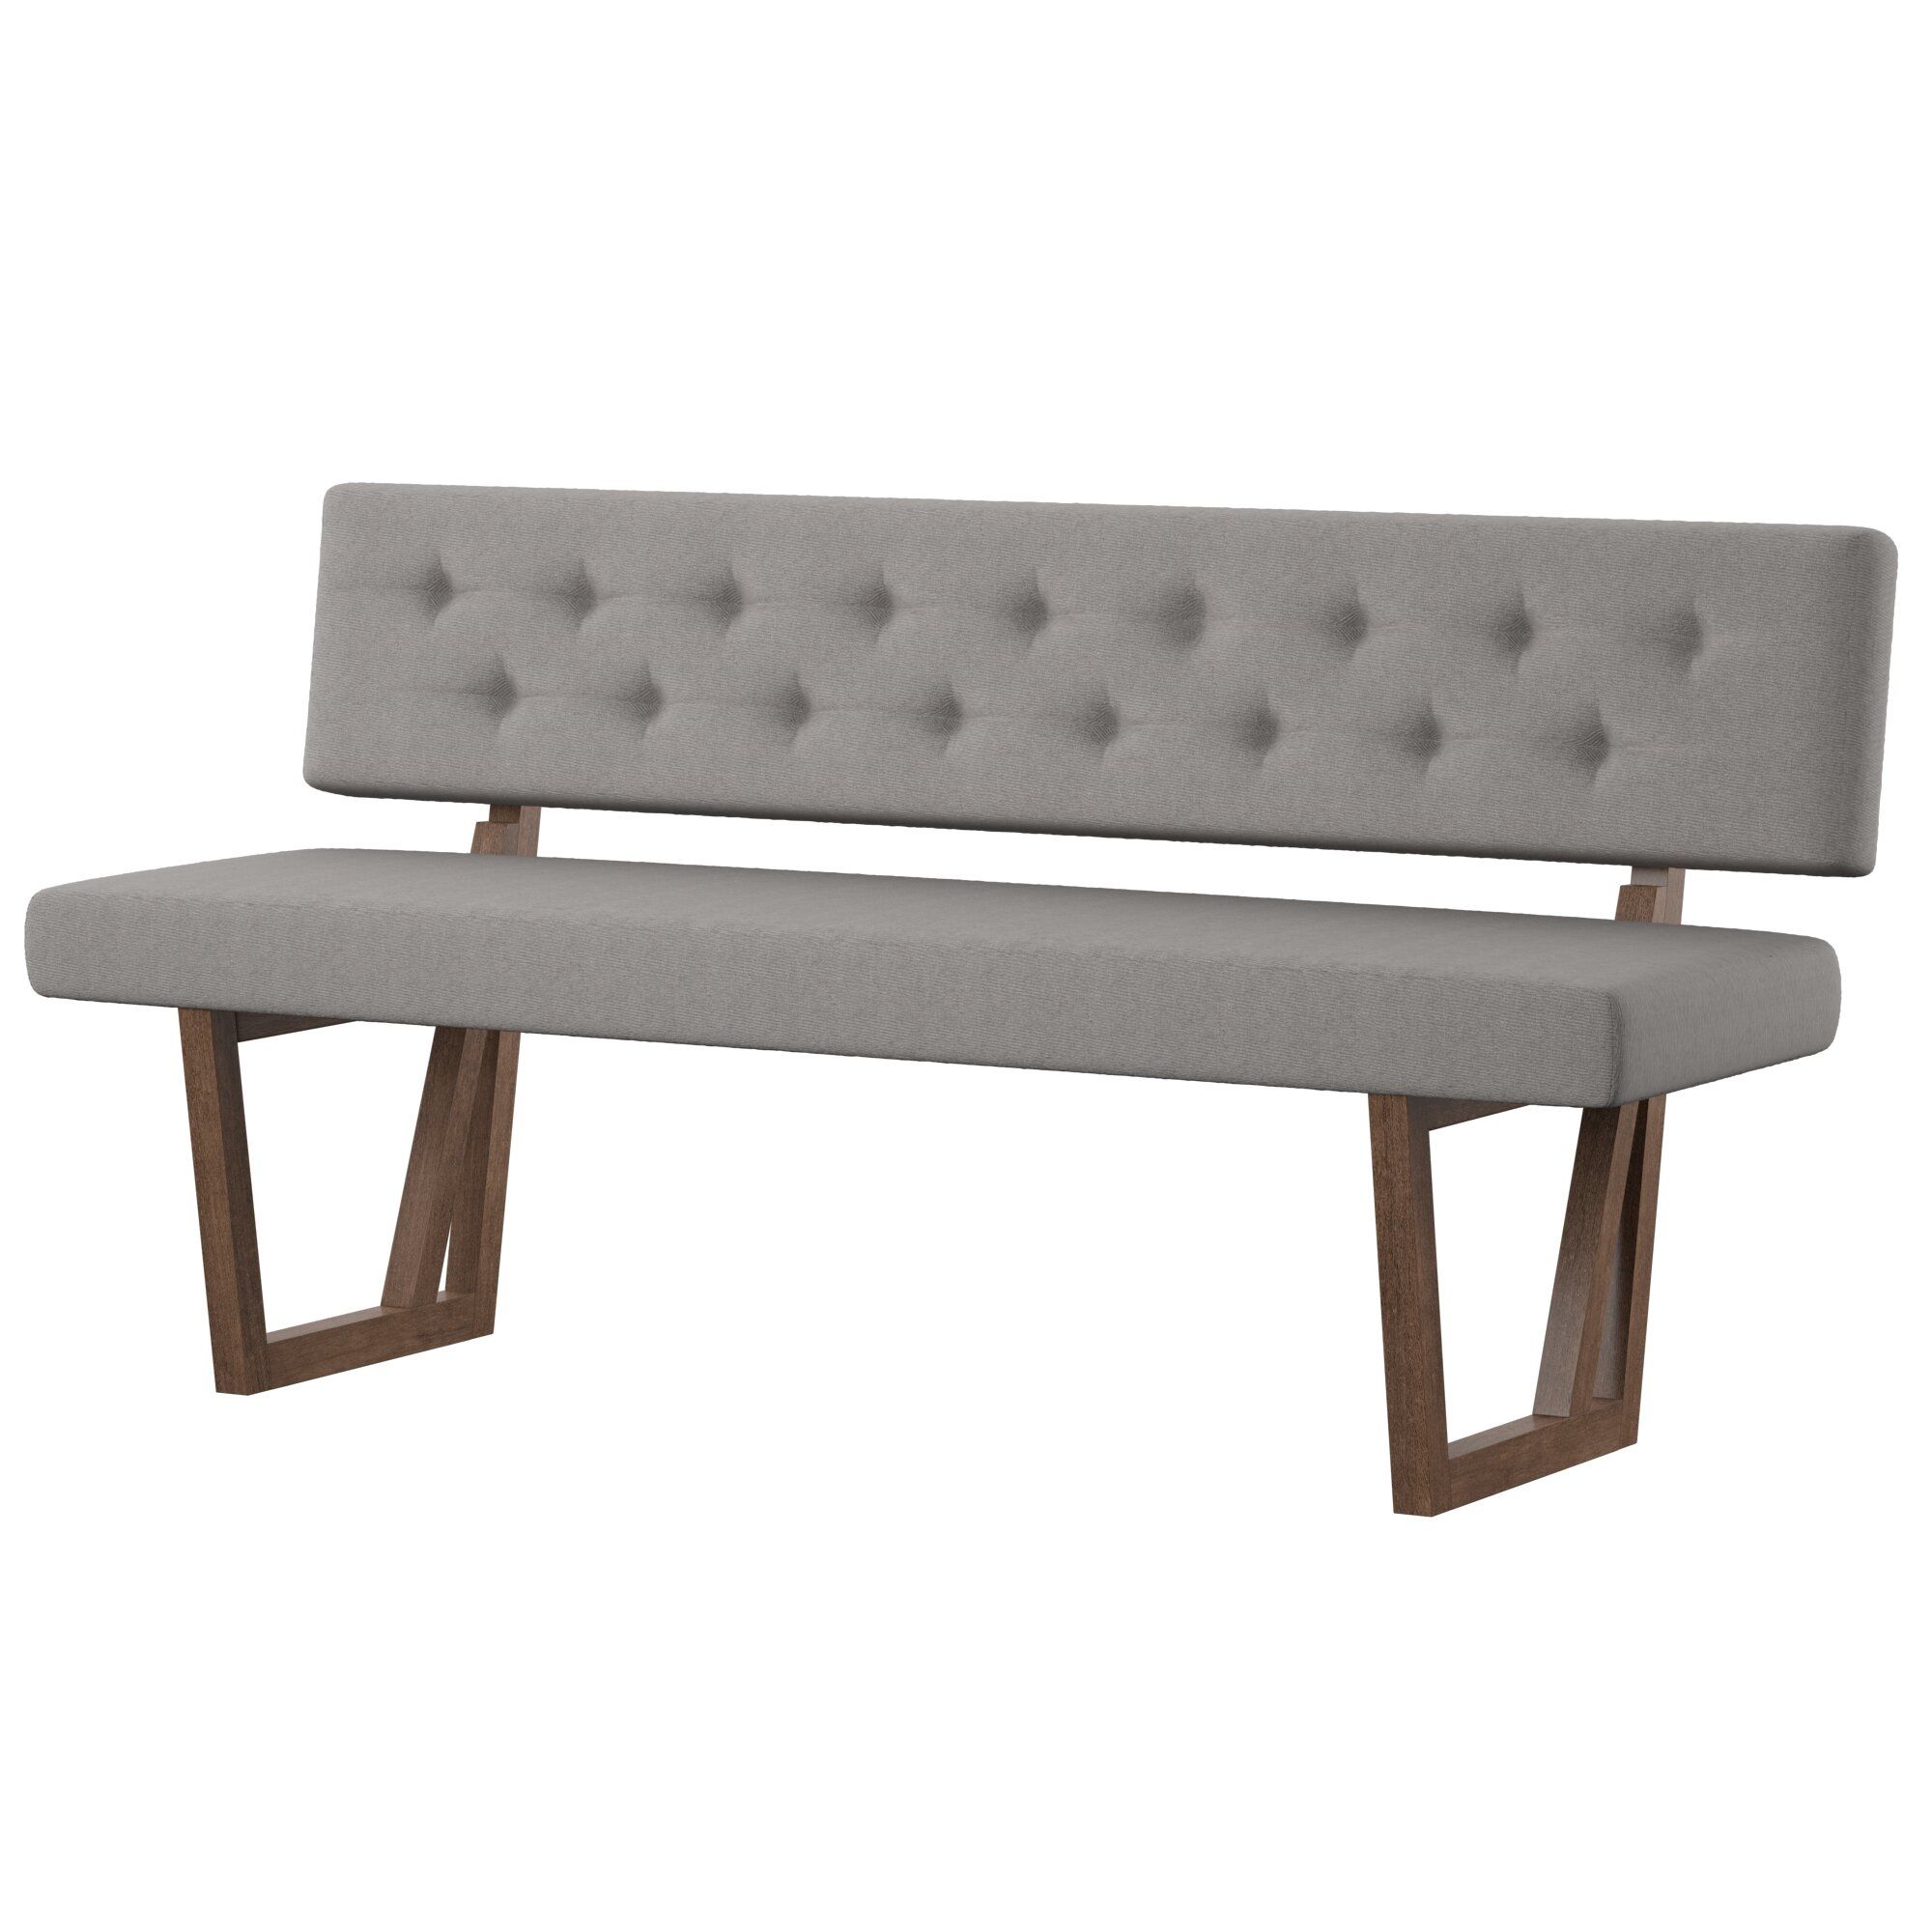 Mukai Upholstered Bench Intended For Newest Mukai 5 Piece Dining Sets (View 17 of 20)